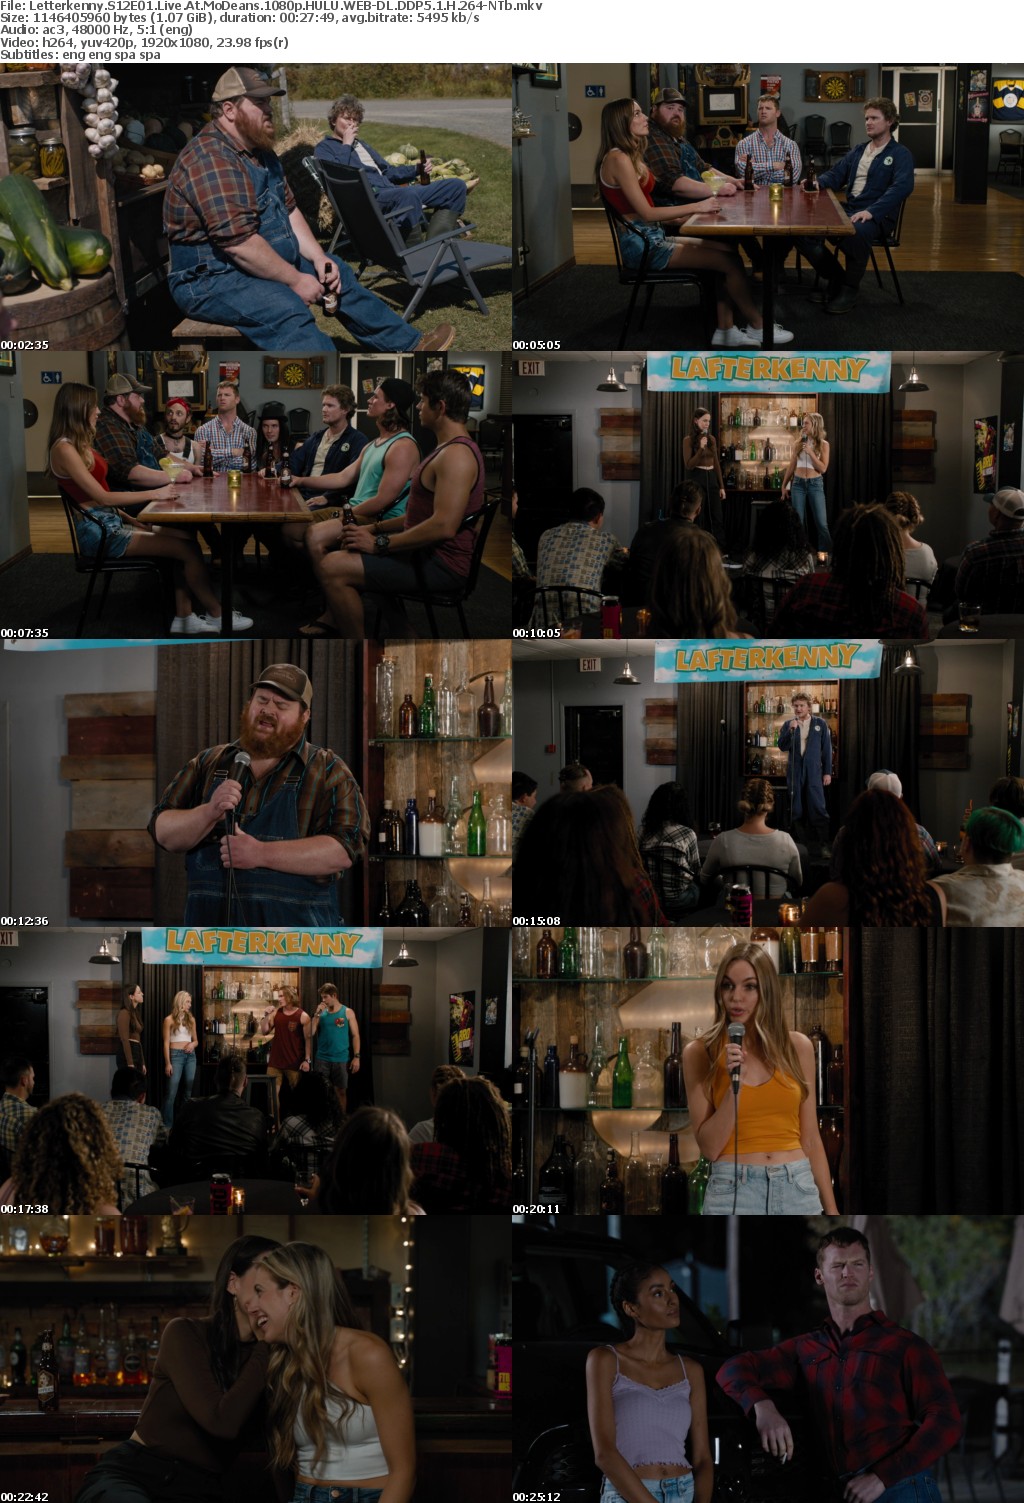 Letterkenny S12E01 Live At MoDeans 1080p HULU WEB-DL DDP5 1 H 264-NTb